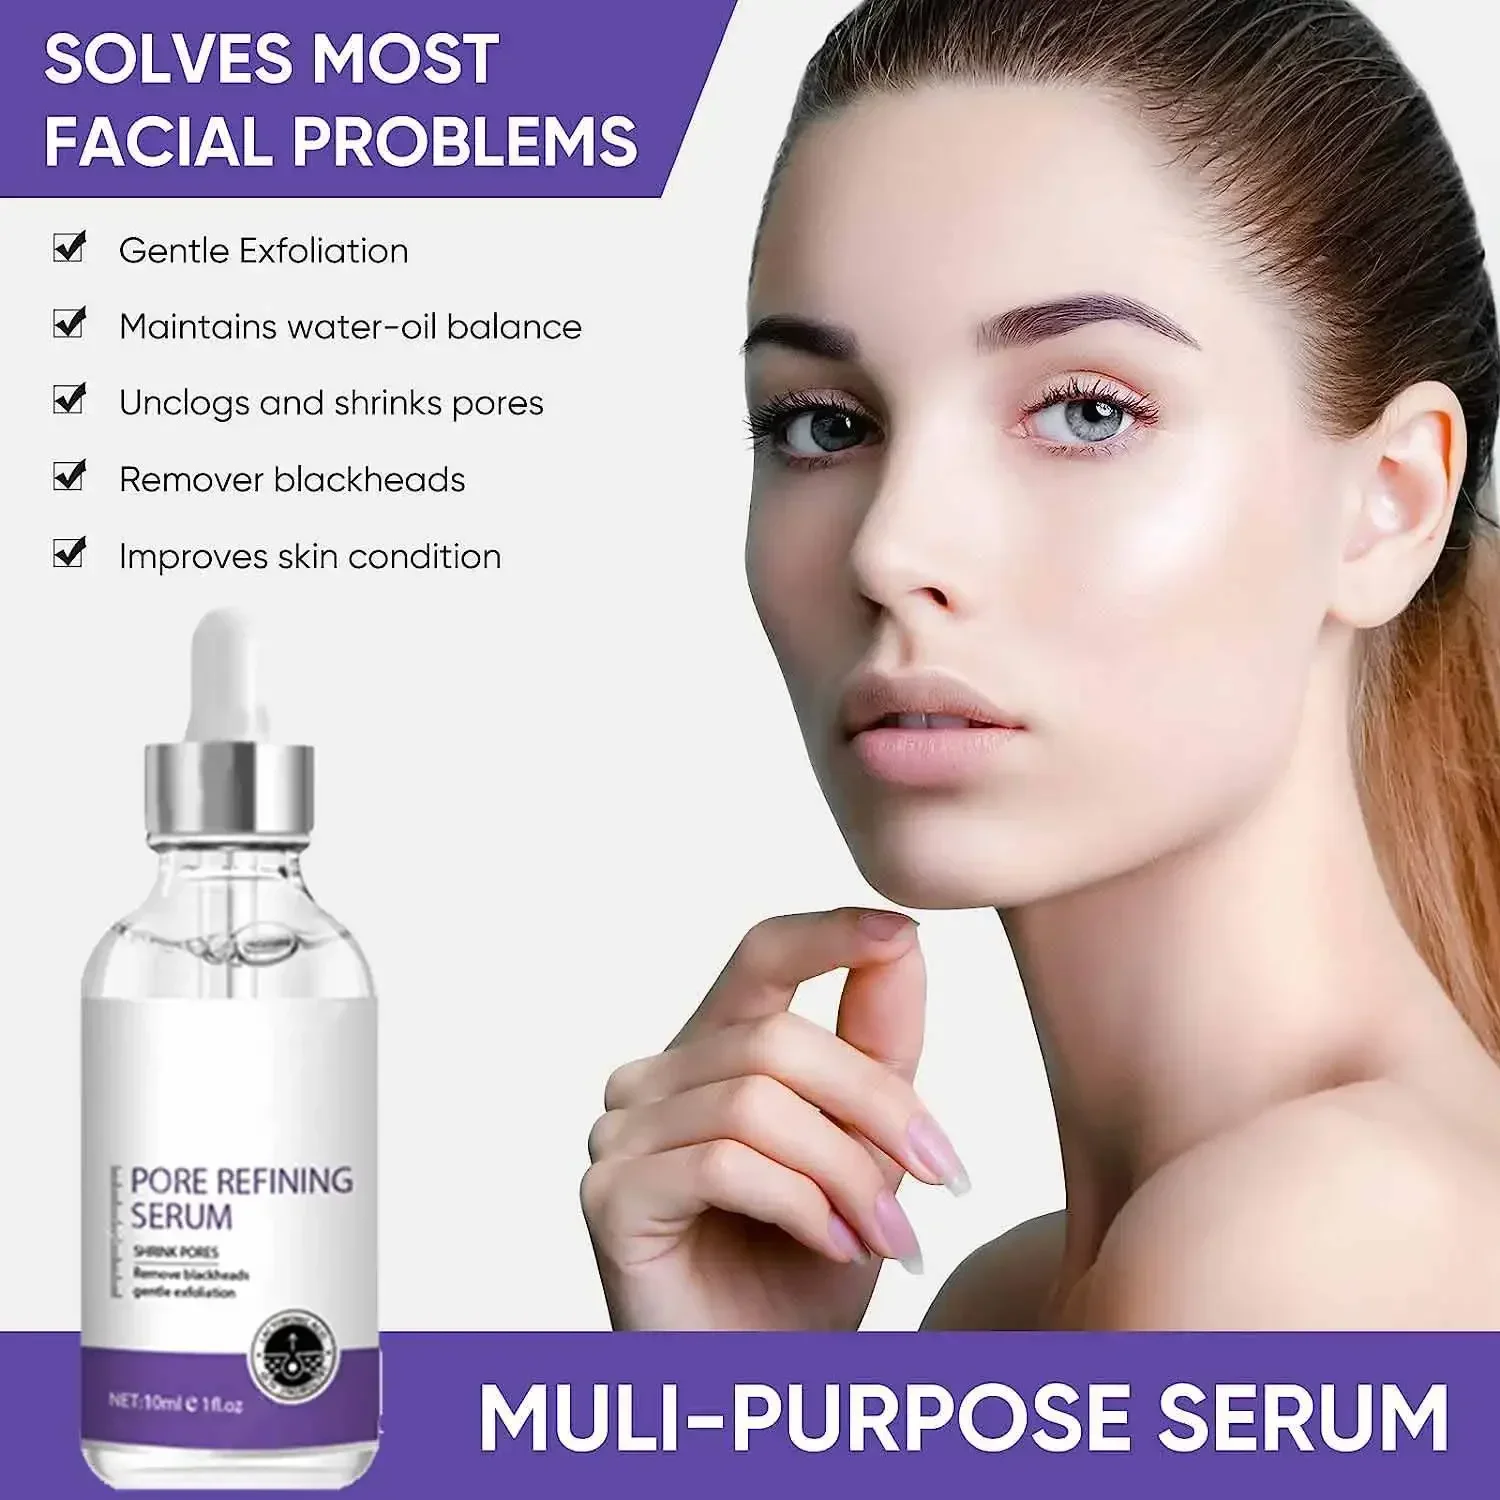 

Pore Perfecting Serum: Minimize Pores, Hydrate Dry Skin, Control Oil, Tighten and Firm - Hot-selling Skincare Product